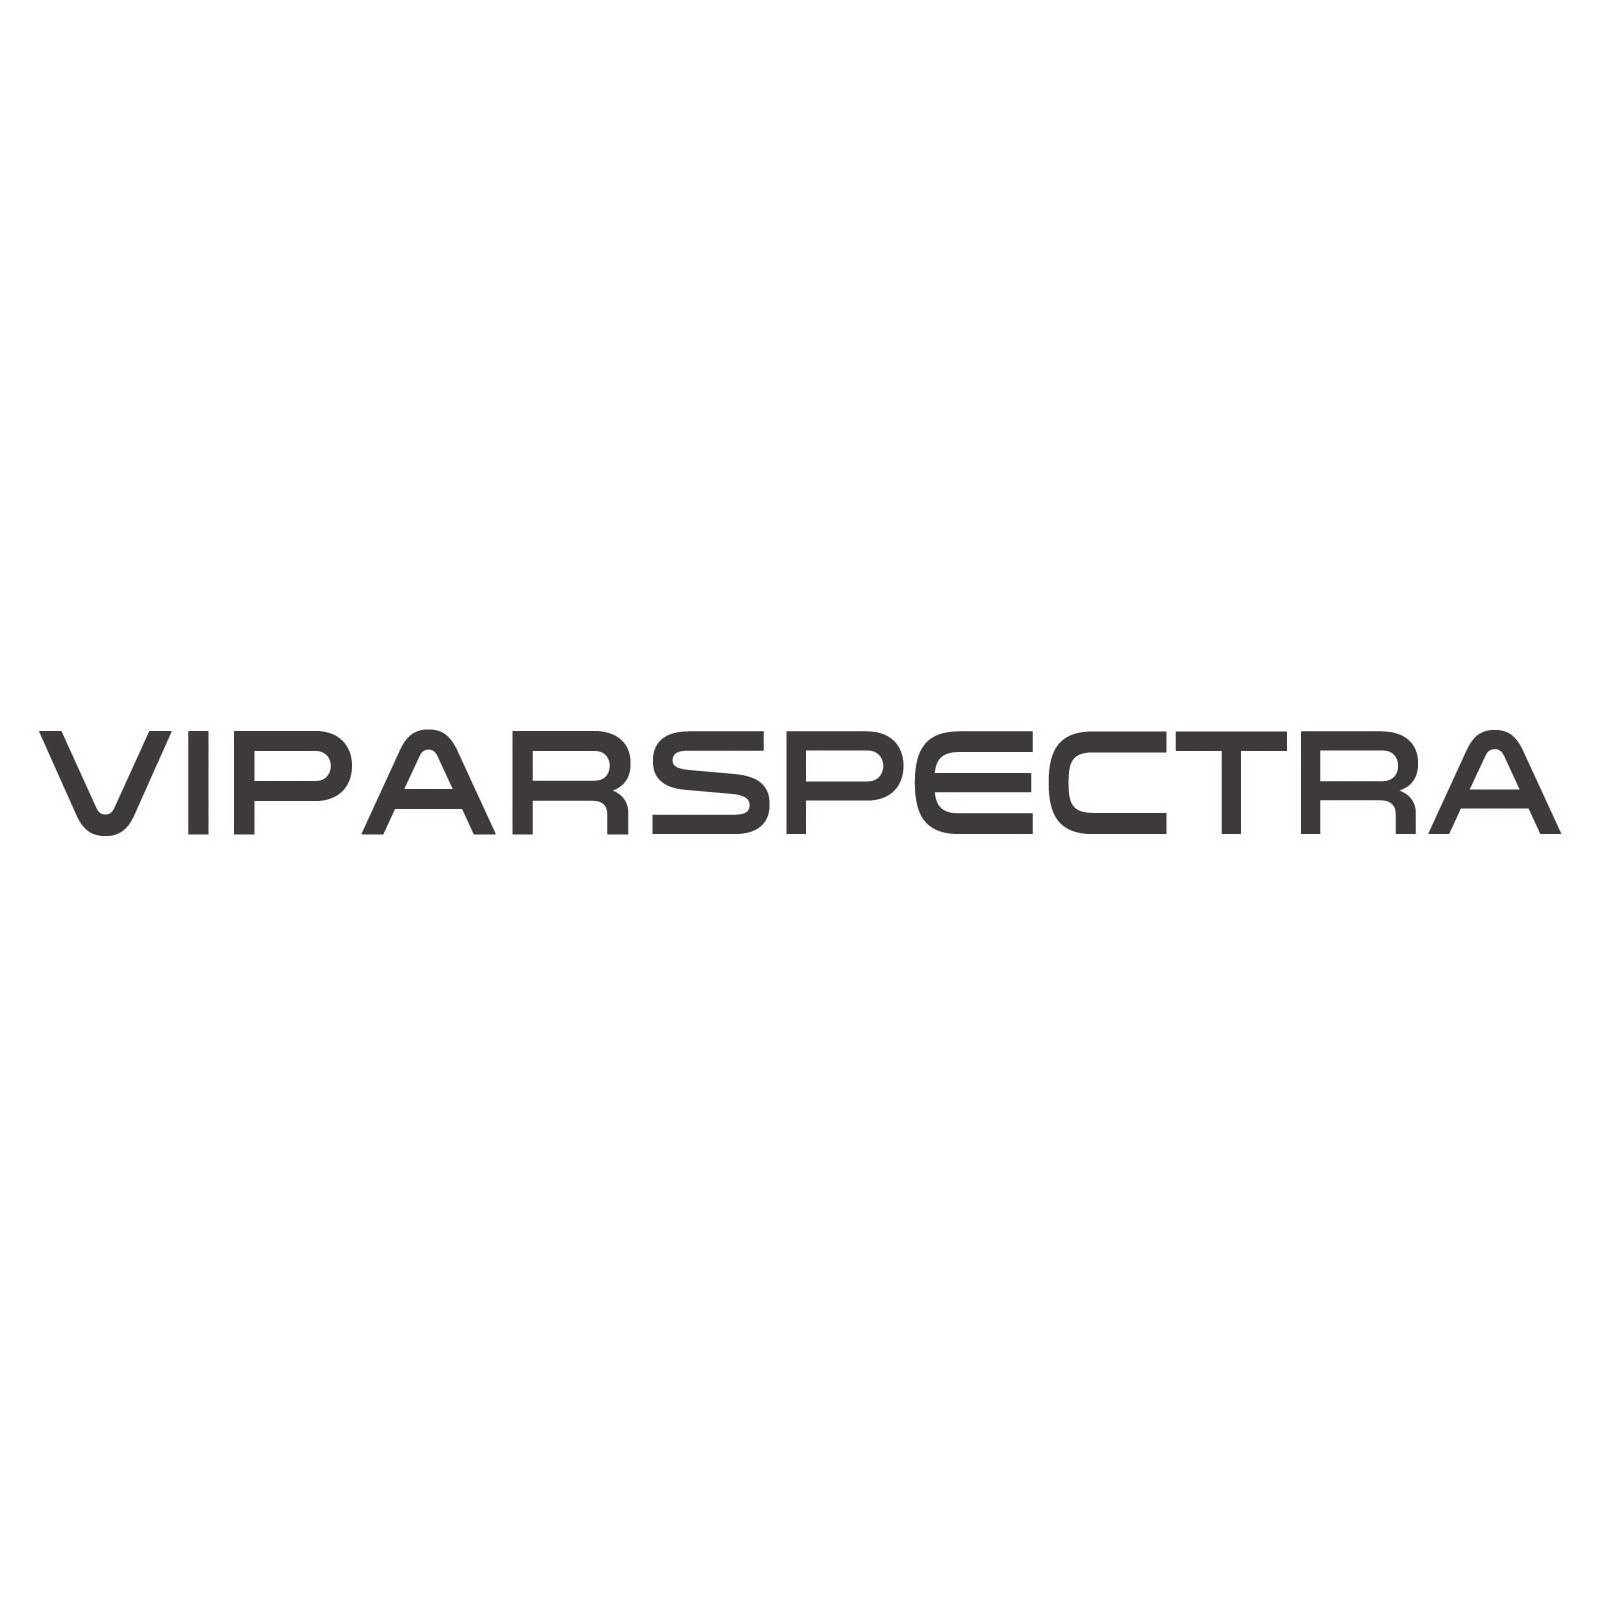 VIPARSPECTRA